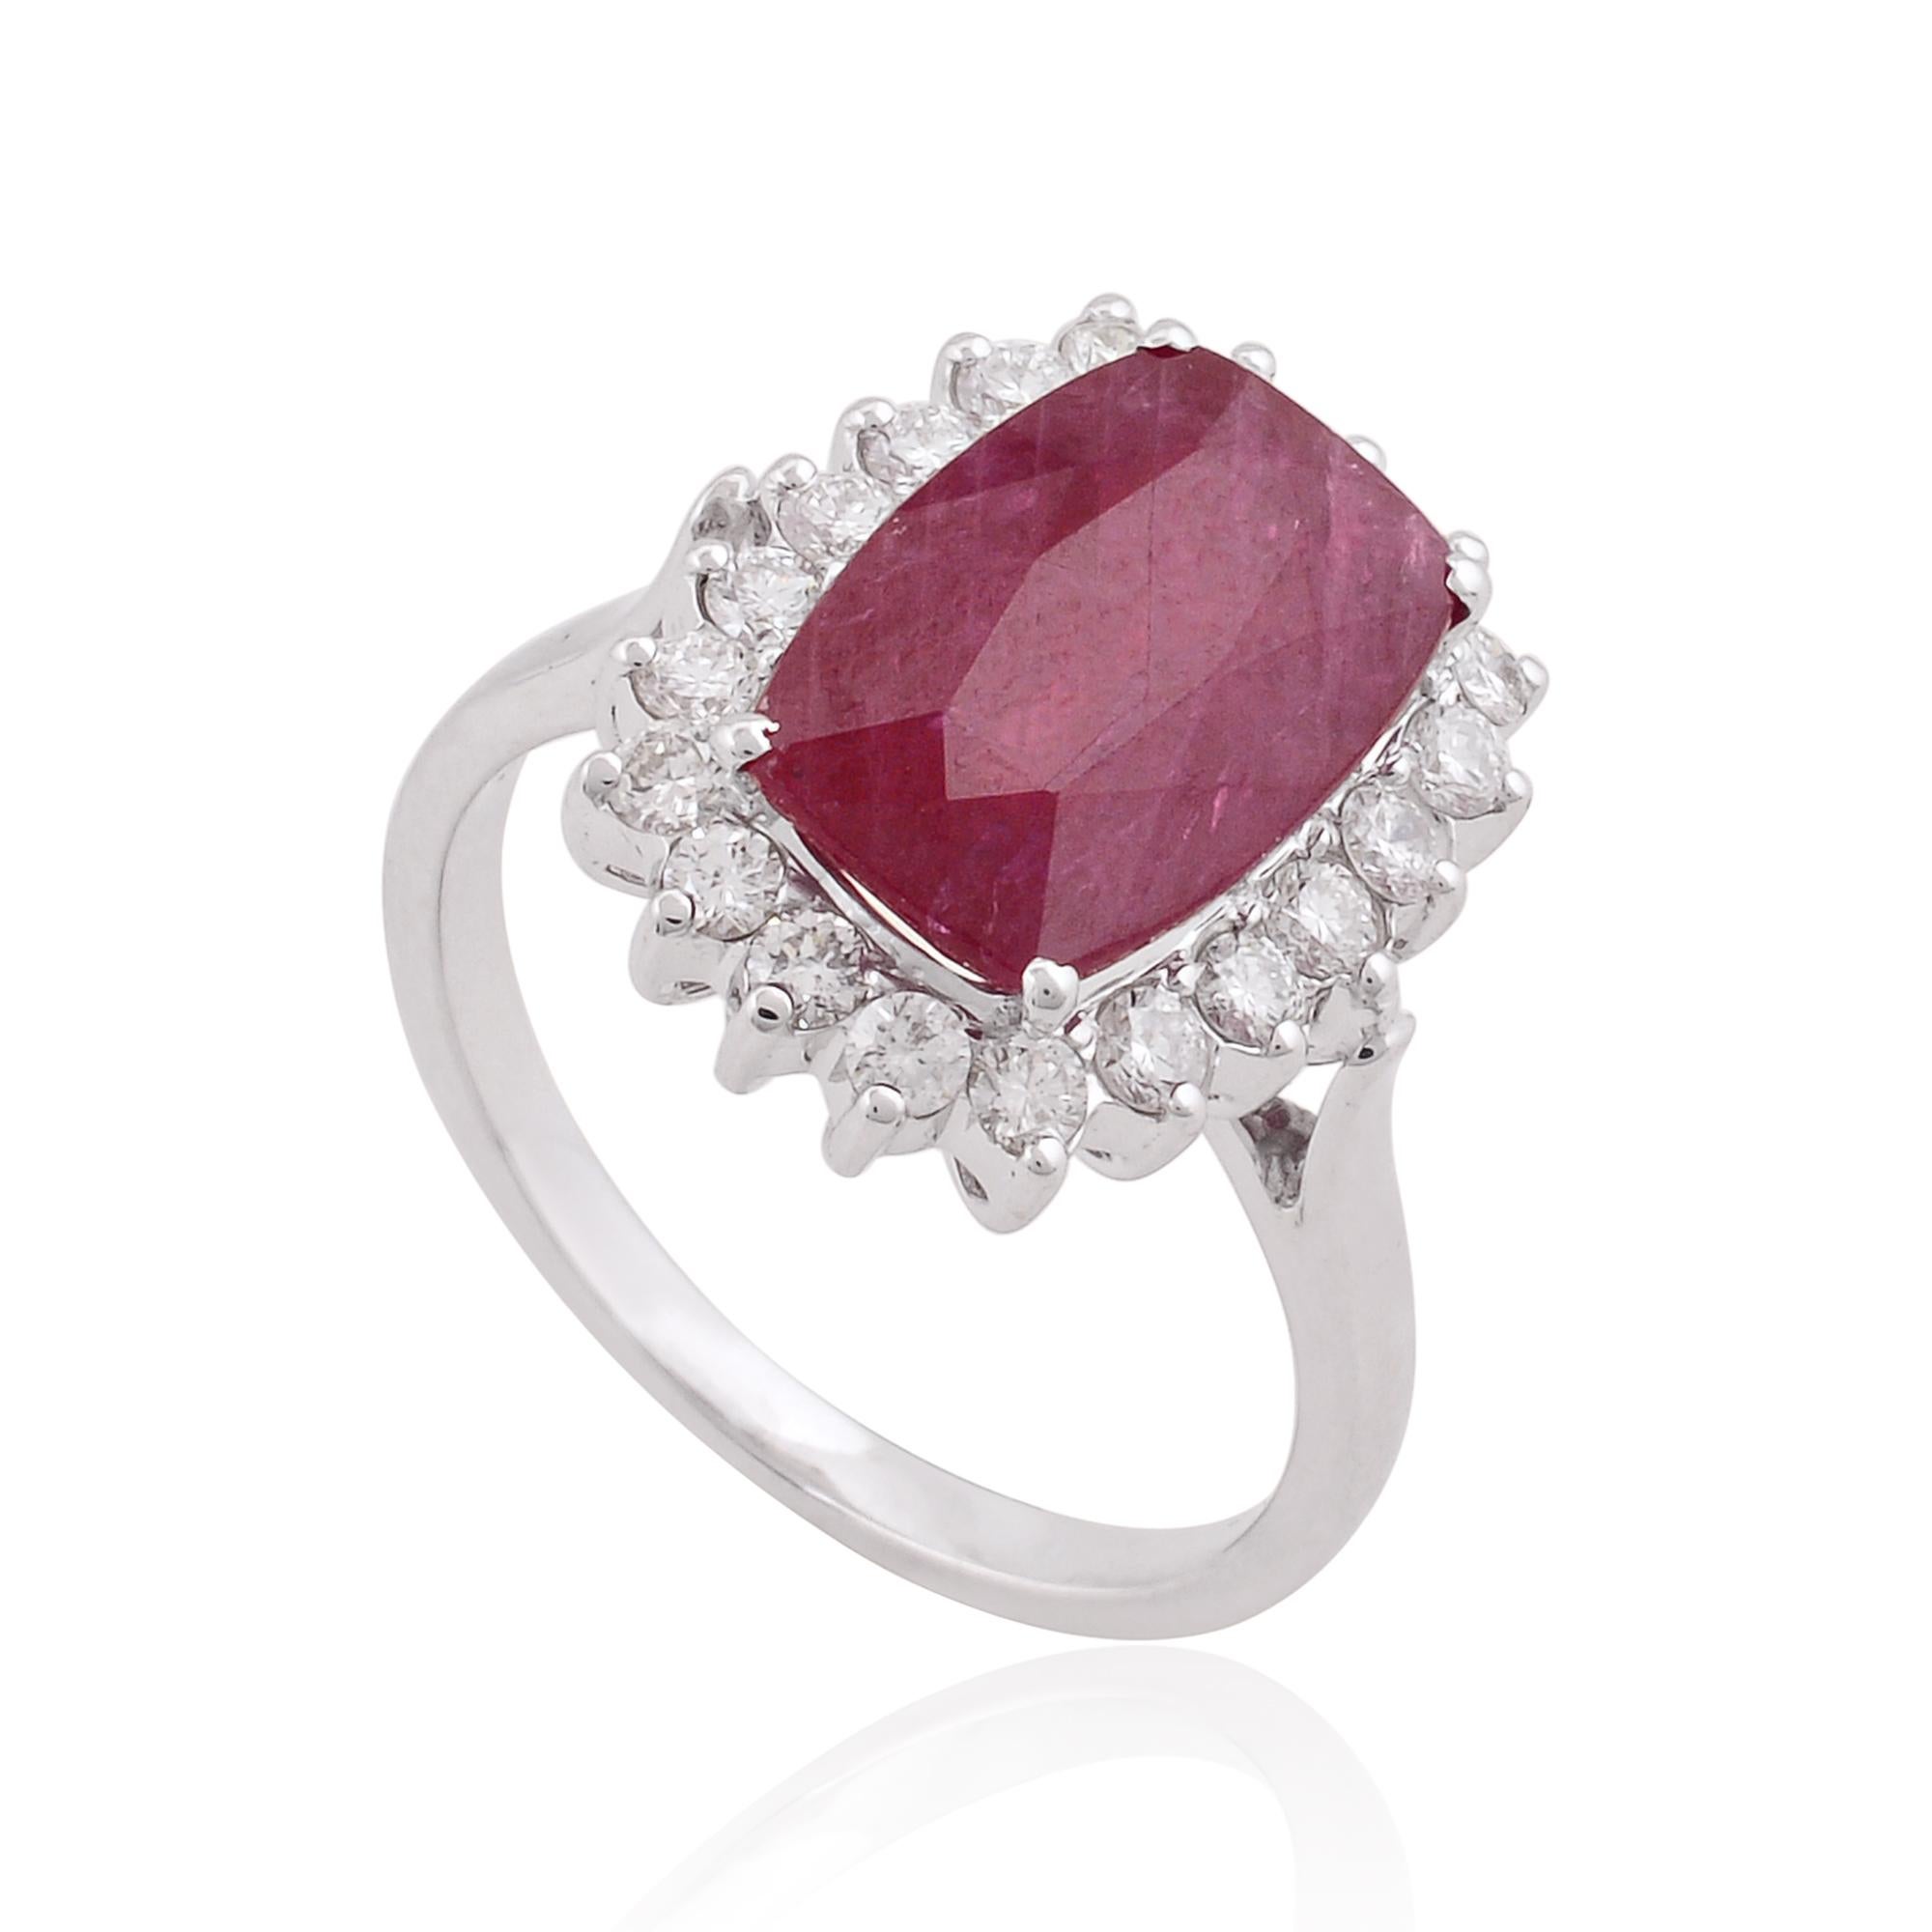 For Sale:  Ruby Gemstone Cocktail Ring Diamond Pave 18k White Gold Handmade Fine Jewelry 4